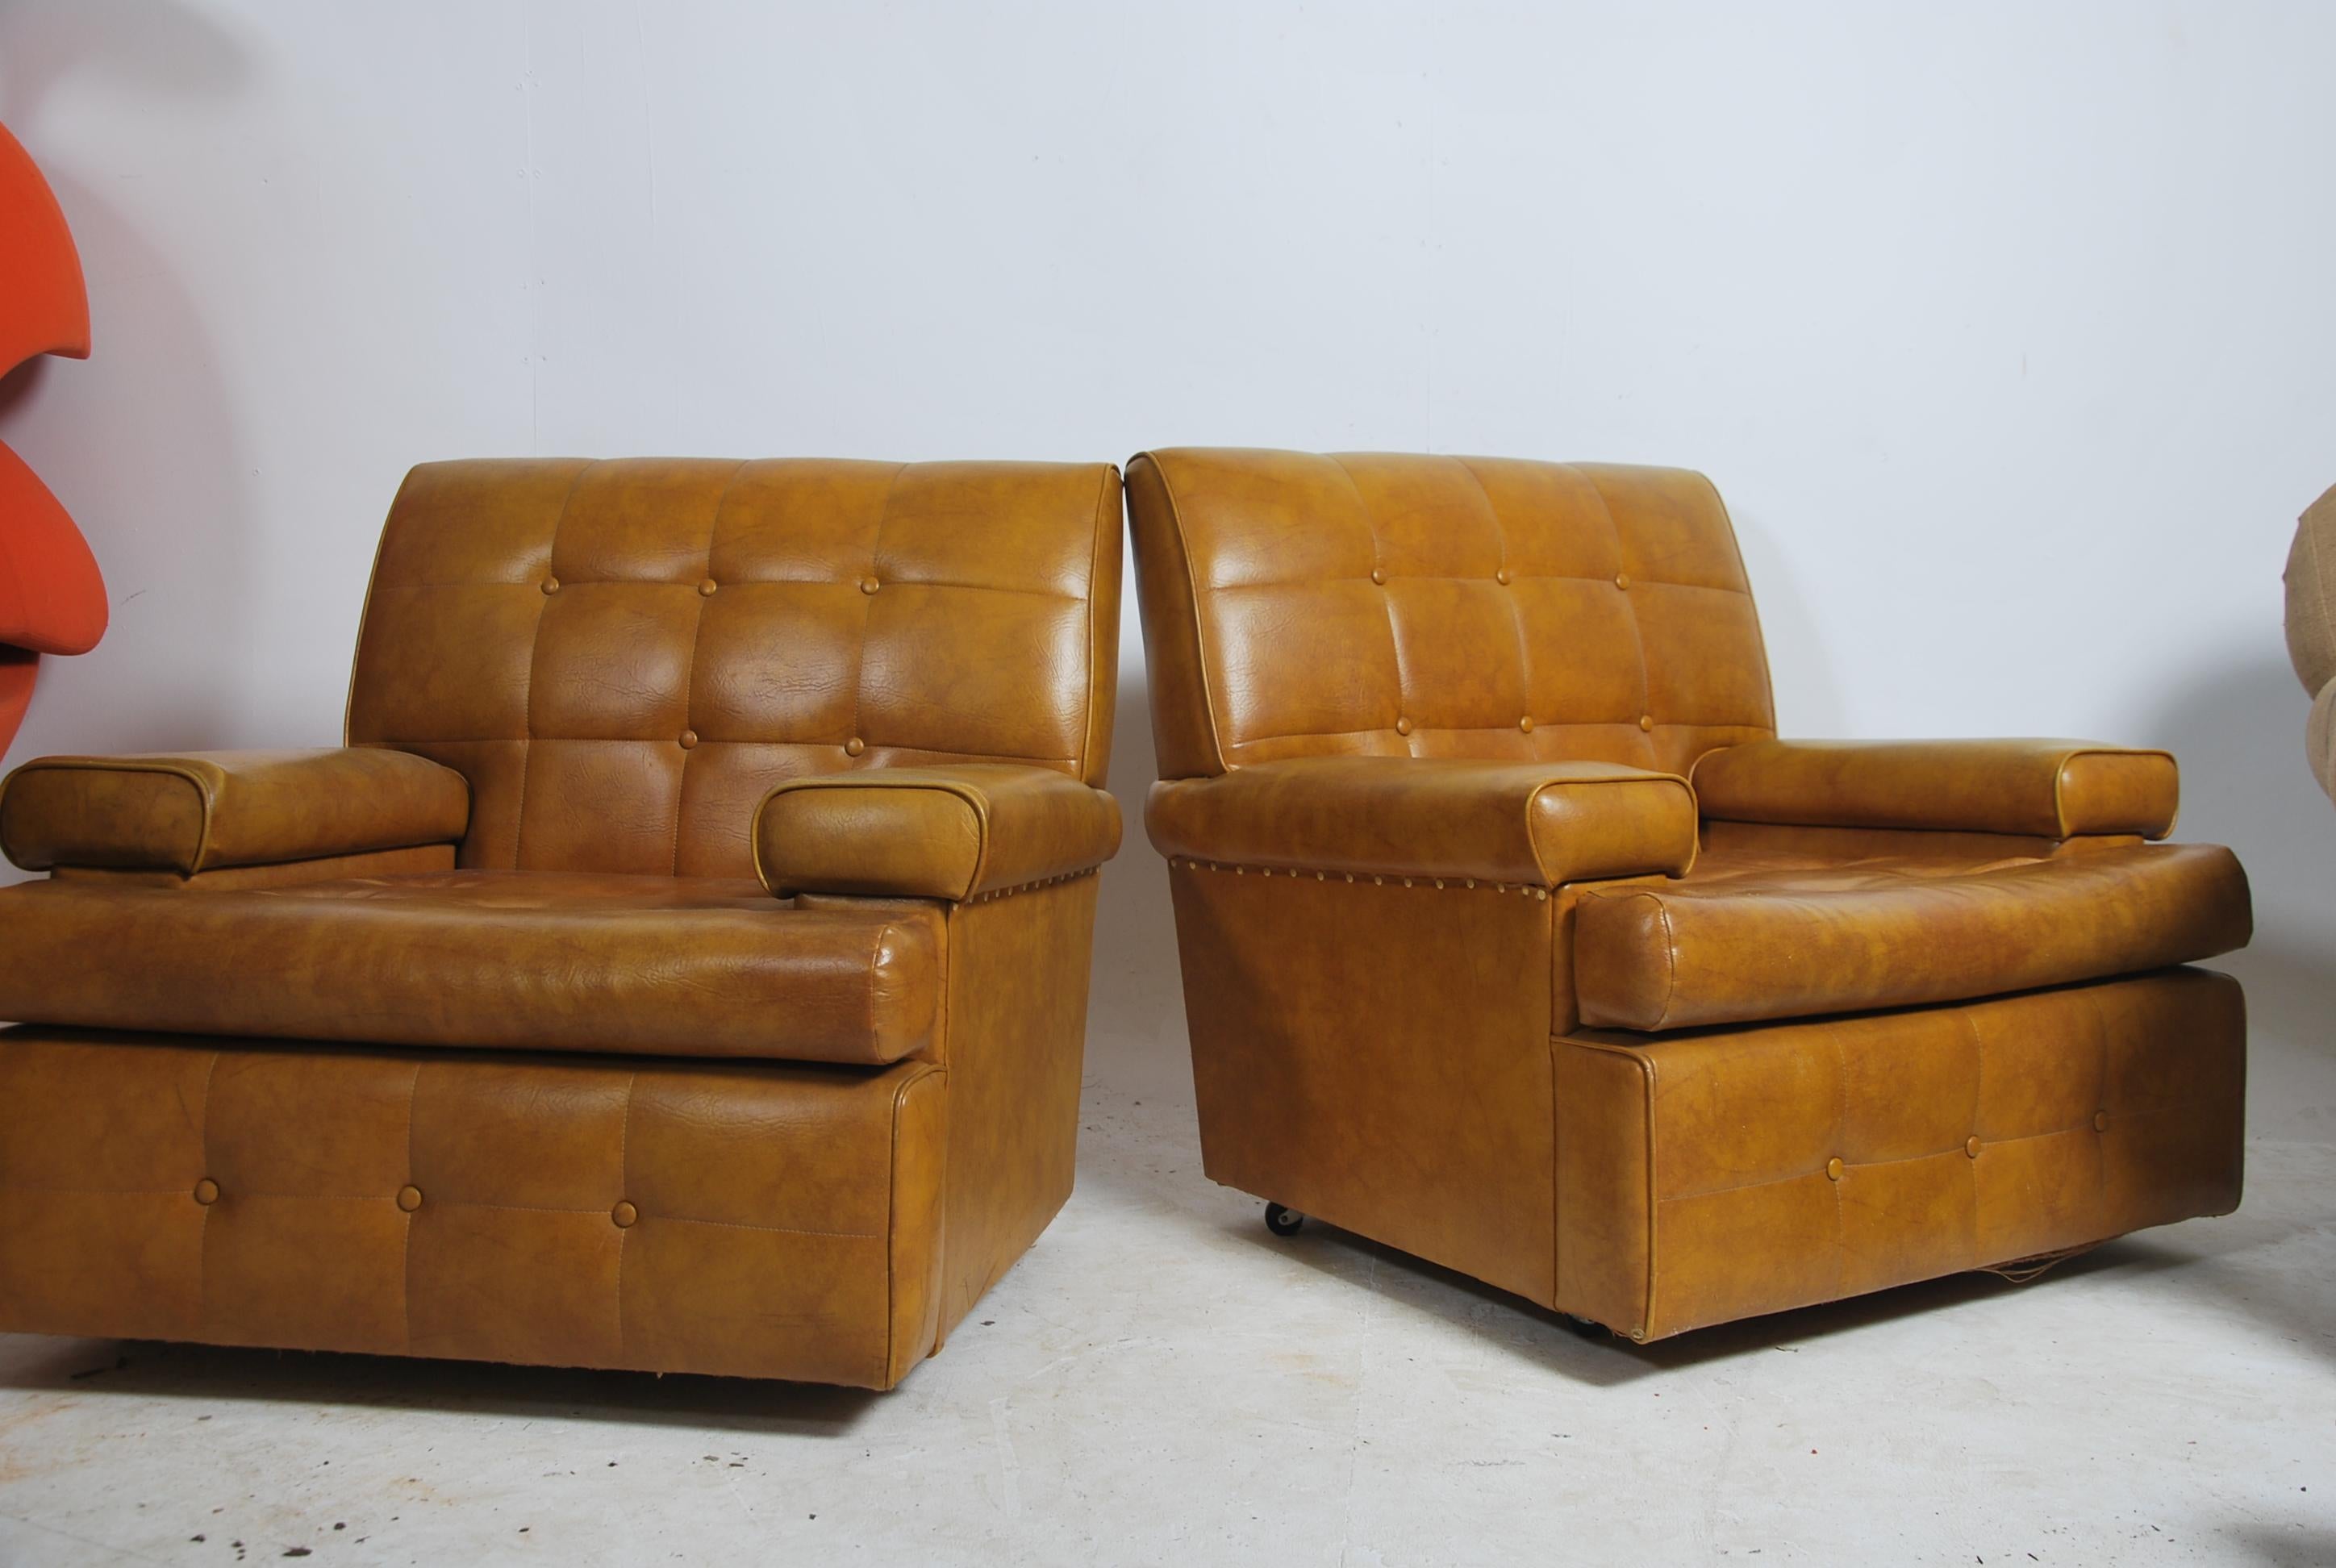 Armchairs, Pair, Lounge, Tan, Vinyl, 1960s, Danish, Modern Design, Tufted In Excellent Condition For Sale In BUNGAY, SUFFOLK